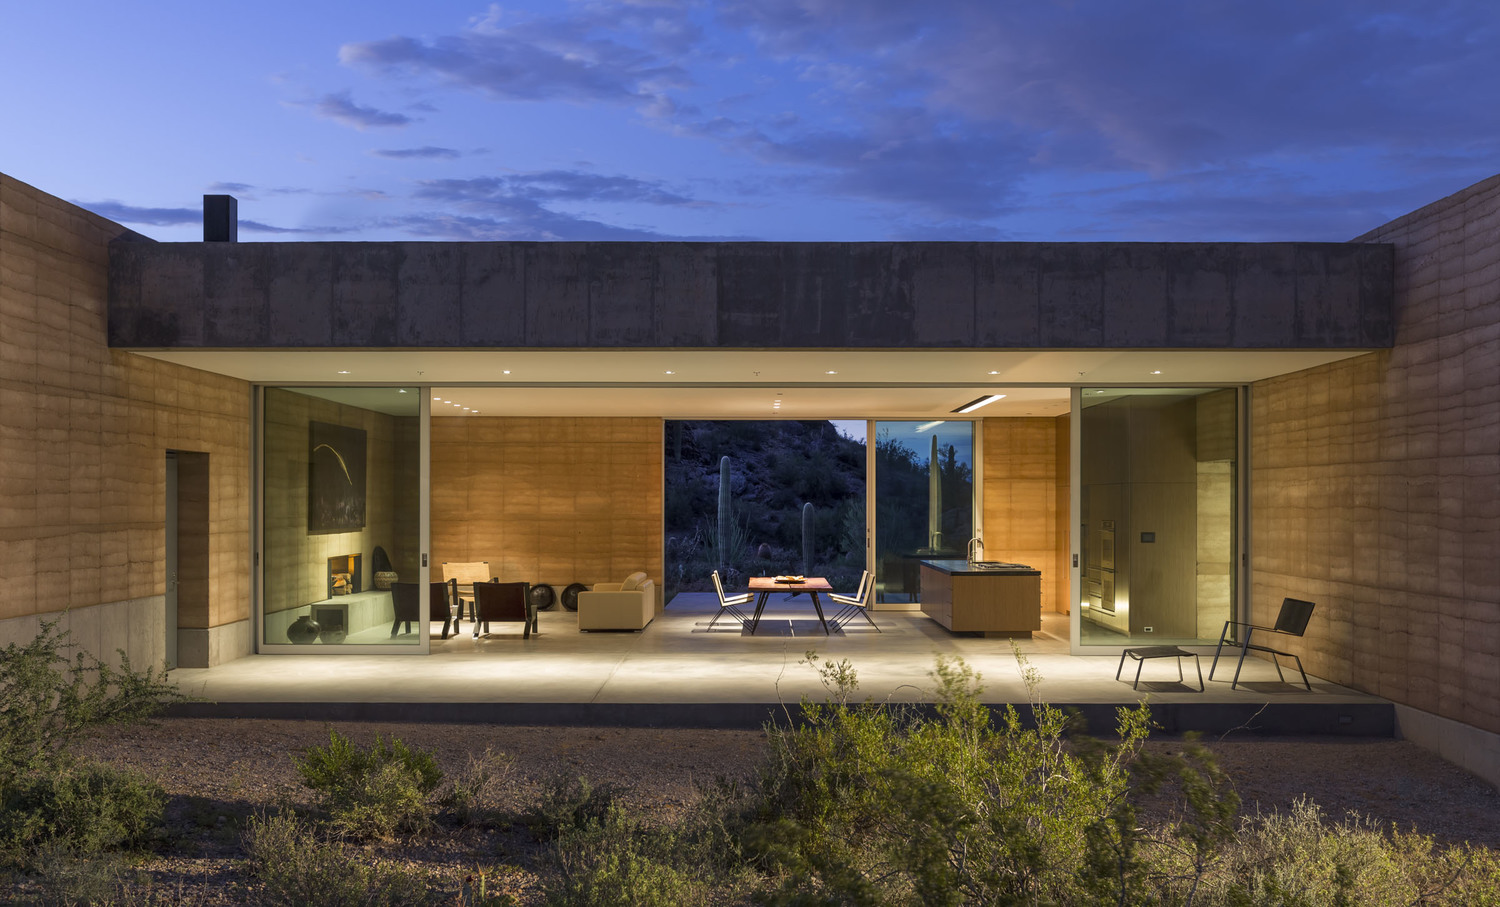 The architecture firm DUST is behind the Tucson Mountain Retreat, a rammed earth house located on the outskirts of the Sonoran Desert in Arizona